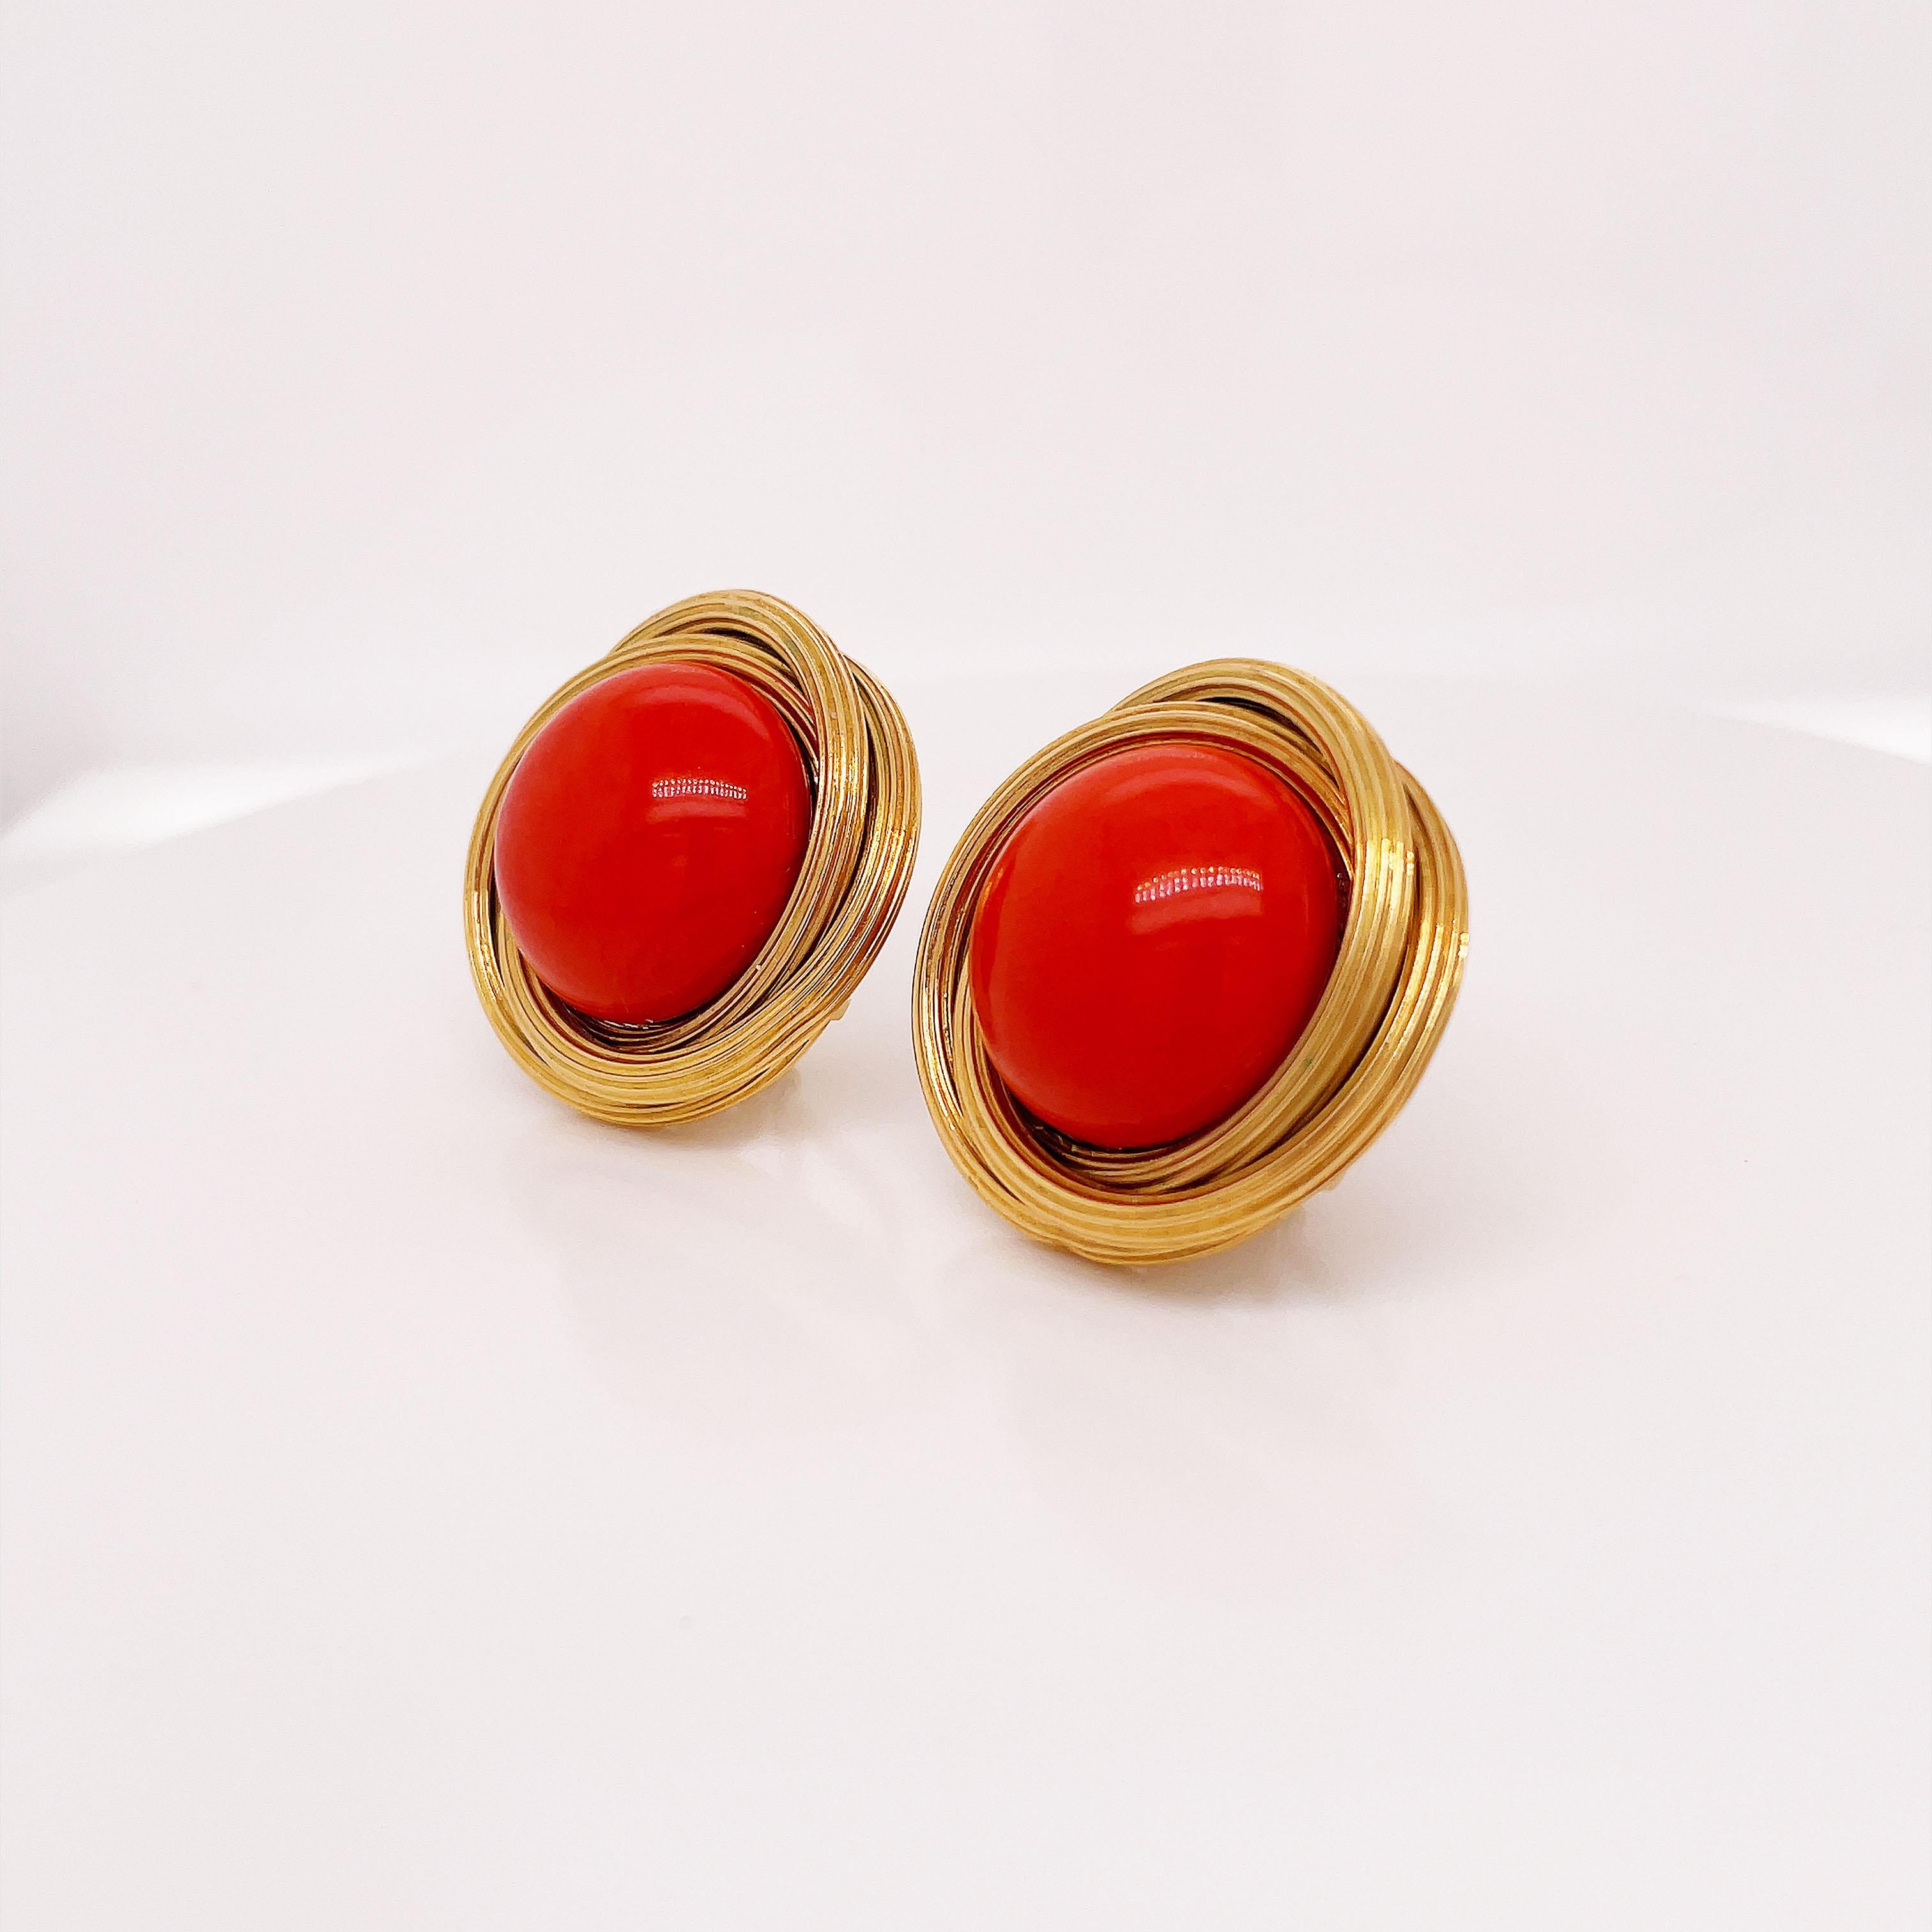 This is a gorgeous pair of Natural Coral Button Clip-On Earrings set in 18K Yellow Gold! This is a big, beautiful, and bold pair of 1950's clip-on earrings! The color of the coral in these earrings is outstanding! A beautiful and bright red-orange